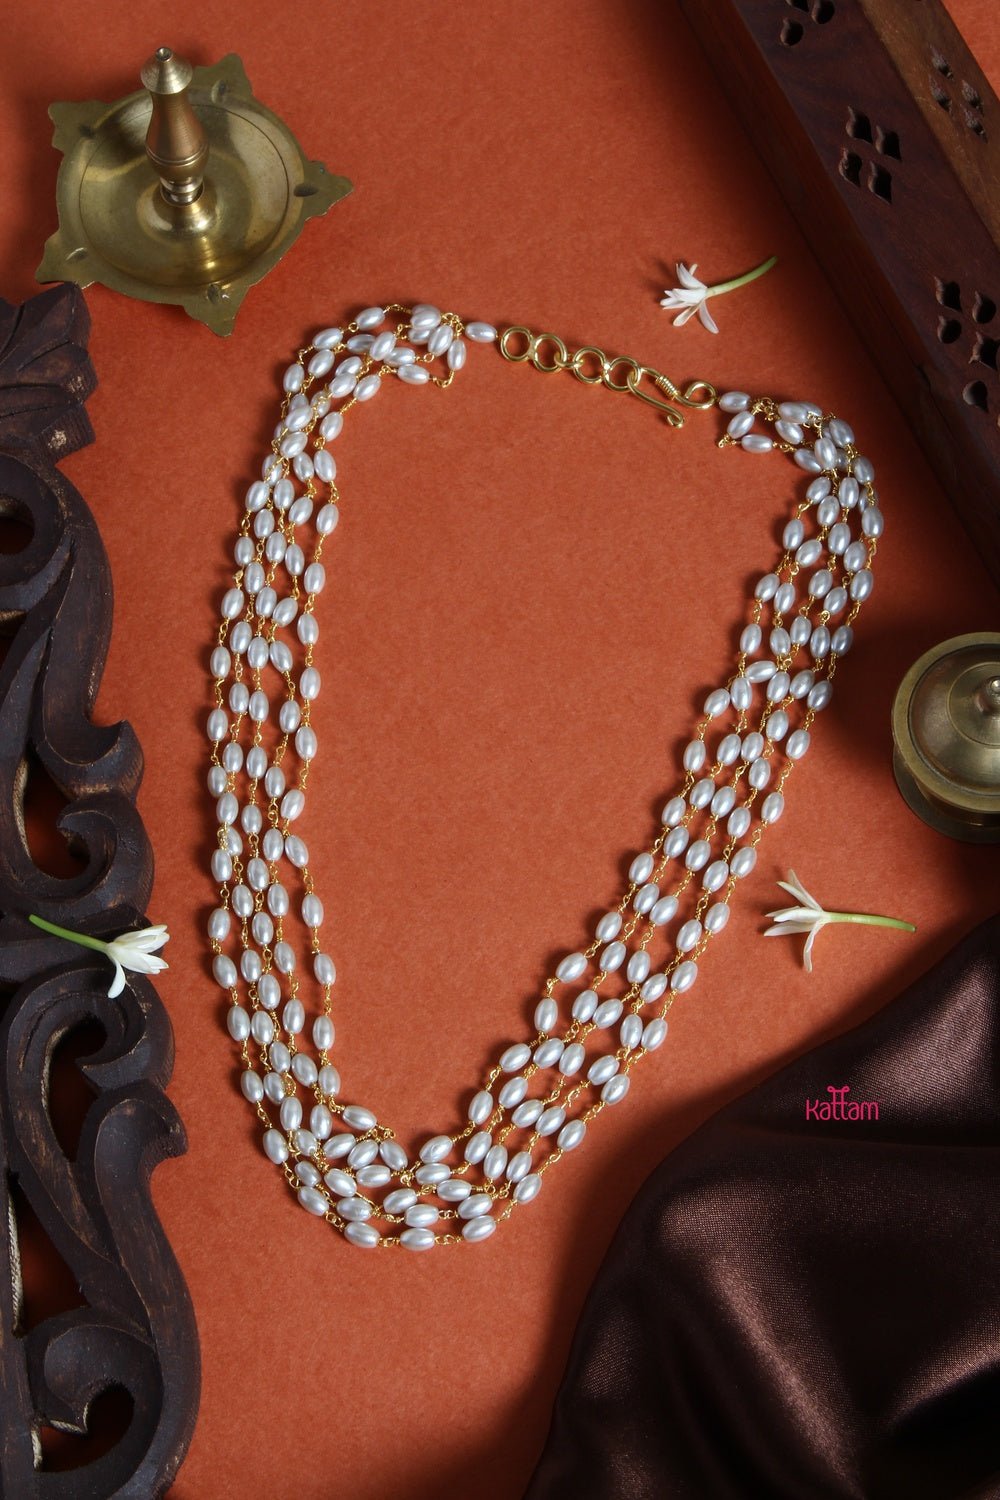 White Rice Pearl - 5 Line 18 Inch ( No Earring ) - N1355